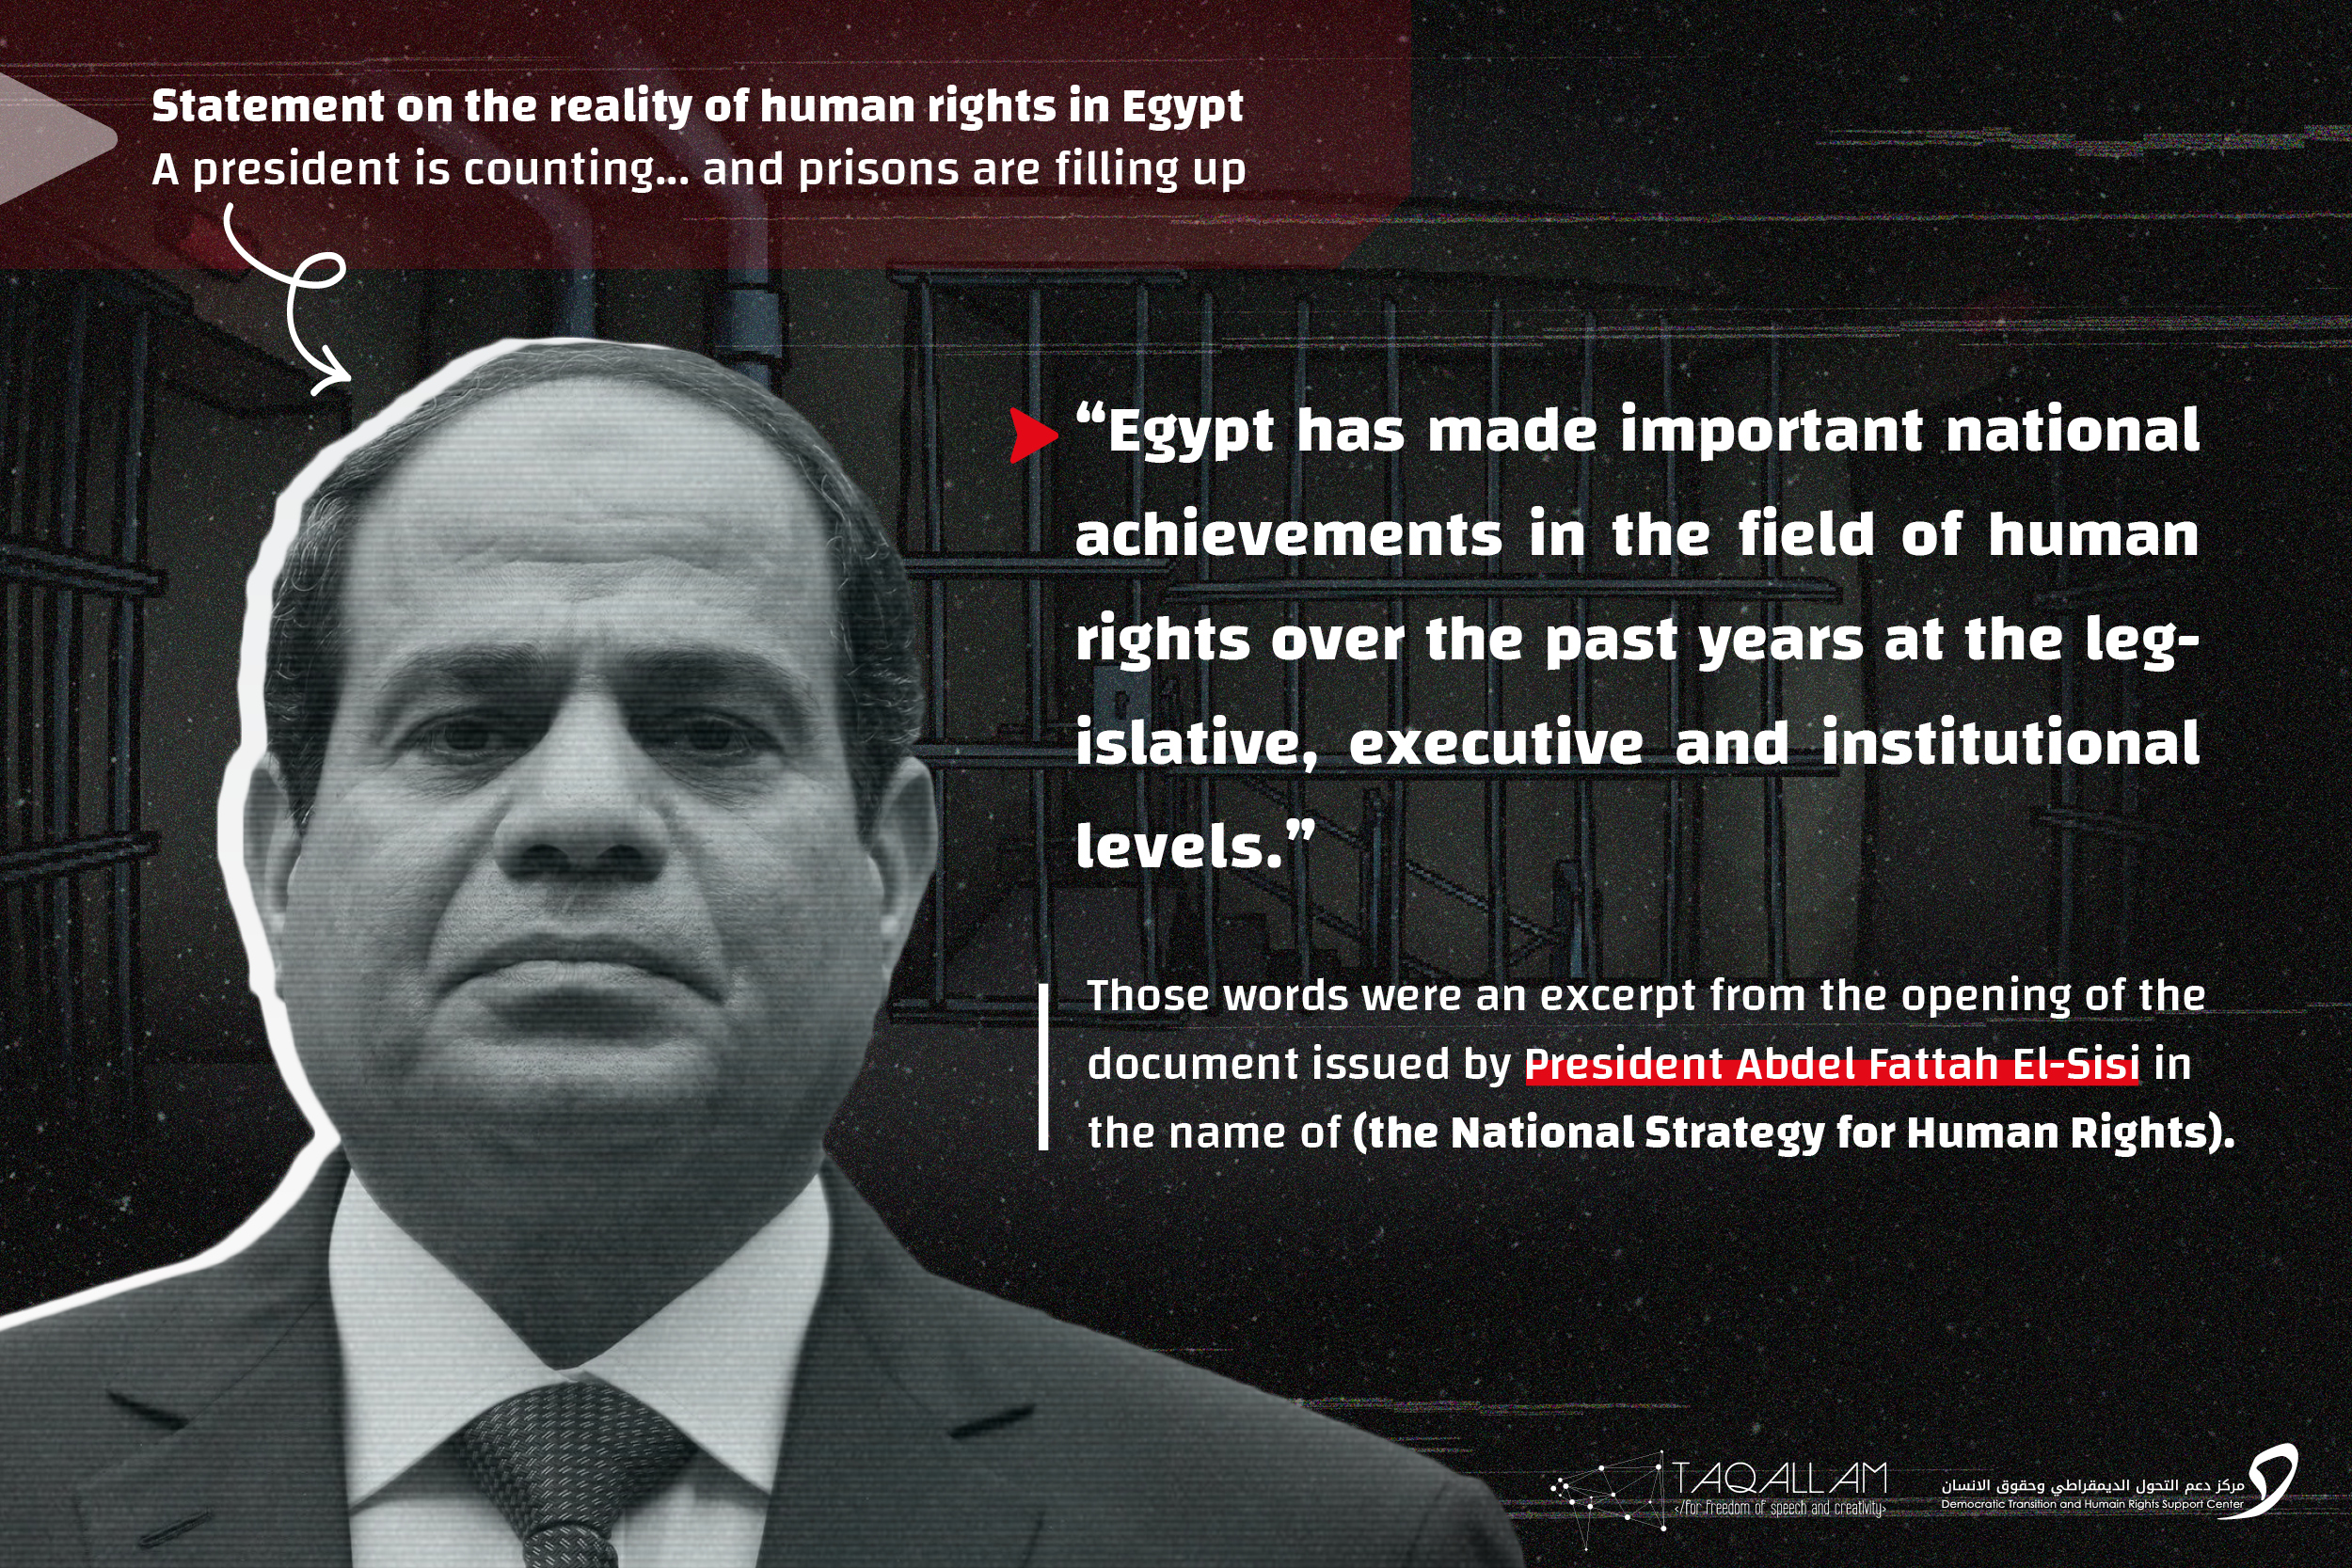 Statement on the reality of human rights in Egypt